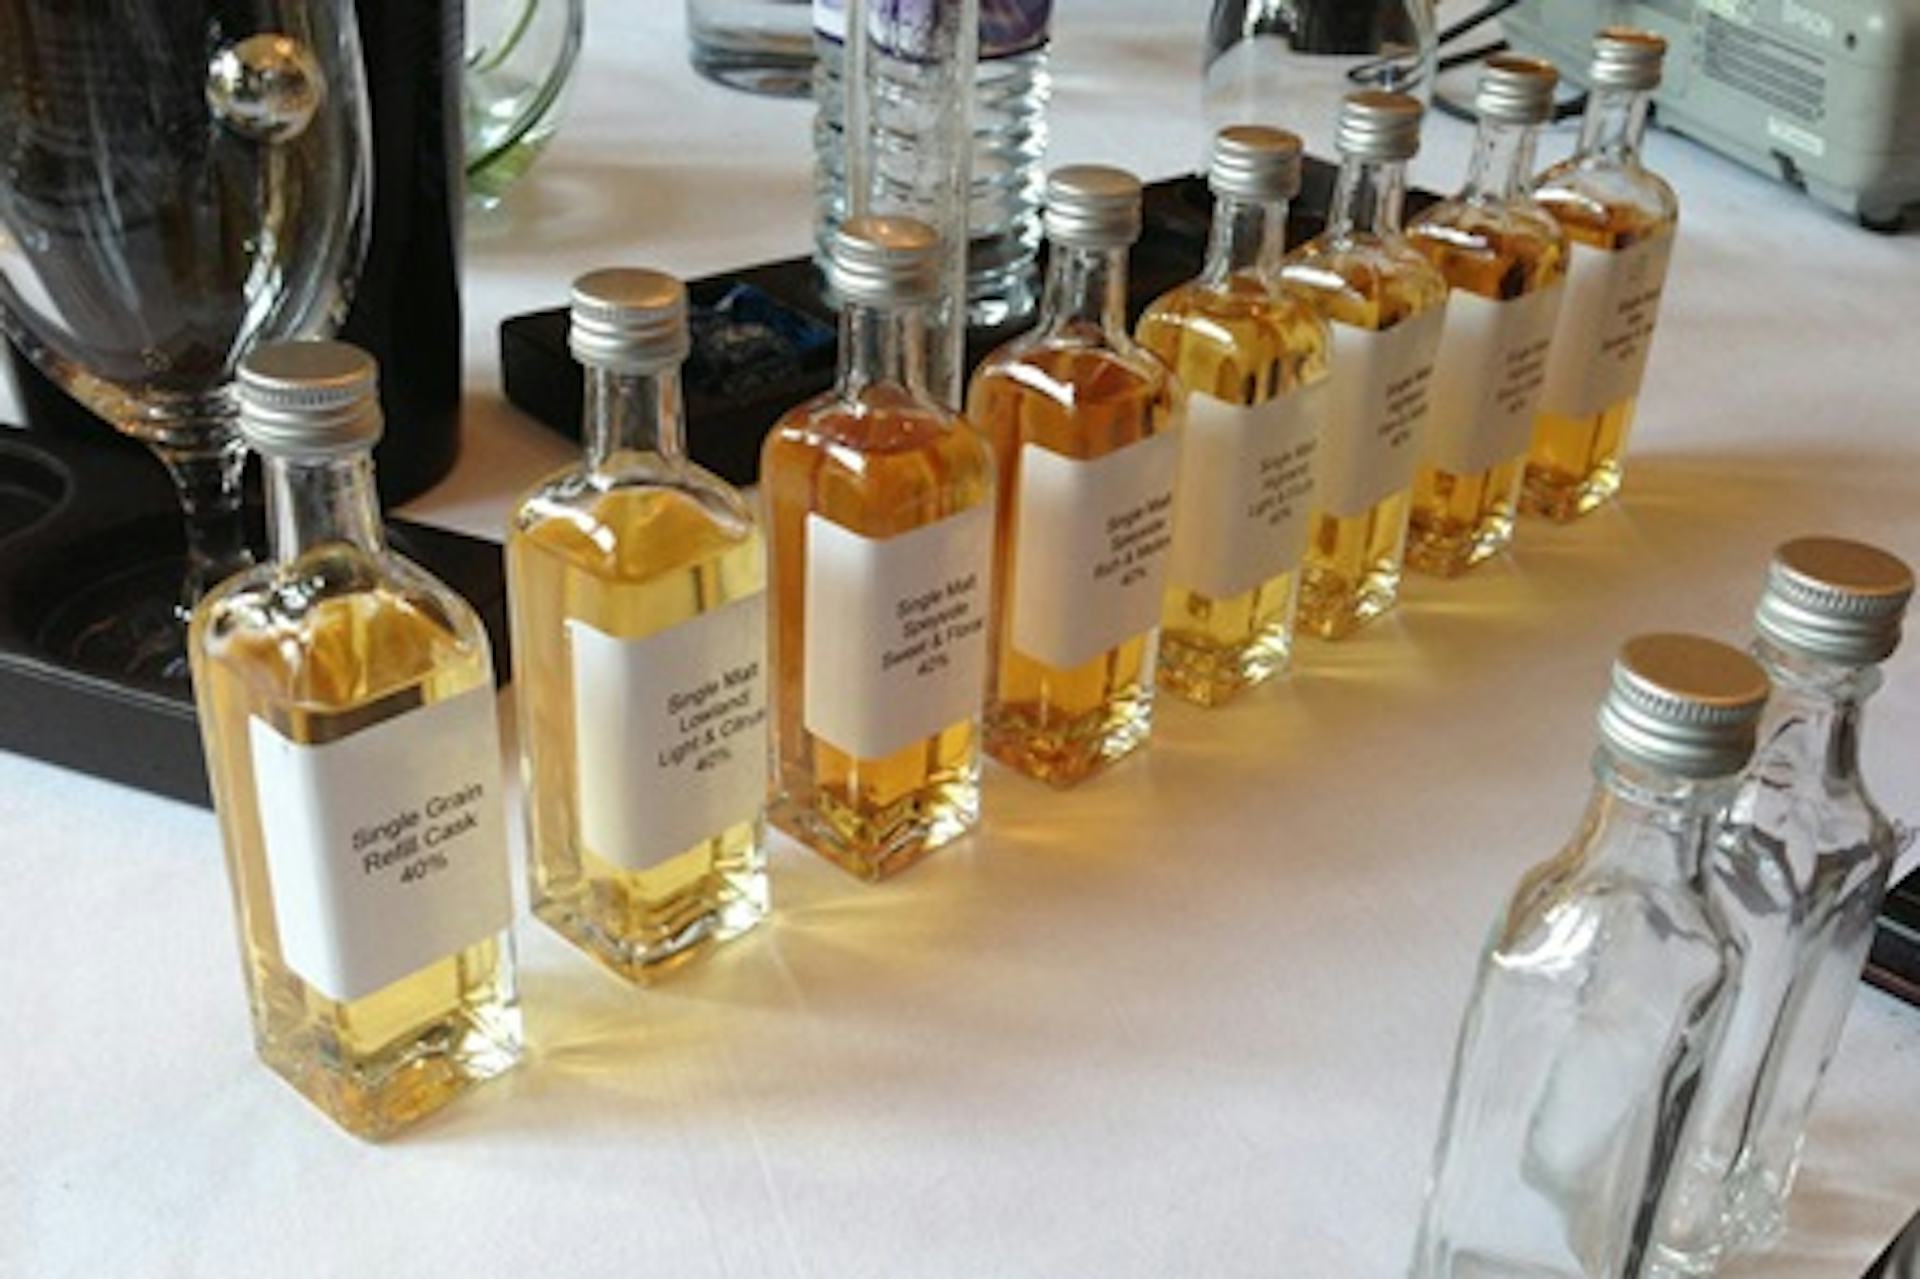 Whisky Blending Experience for Two with The Whisky Lounge